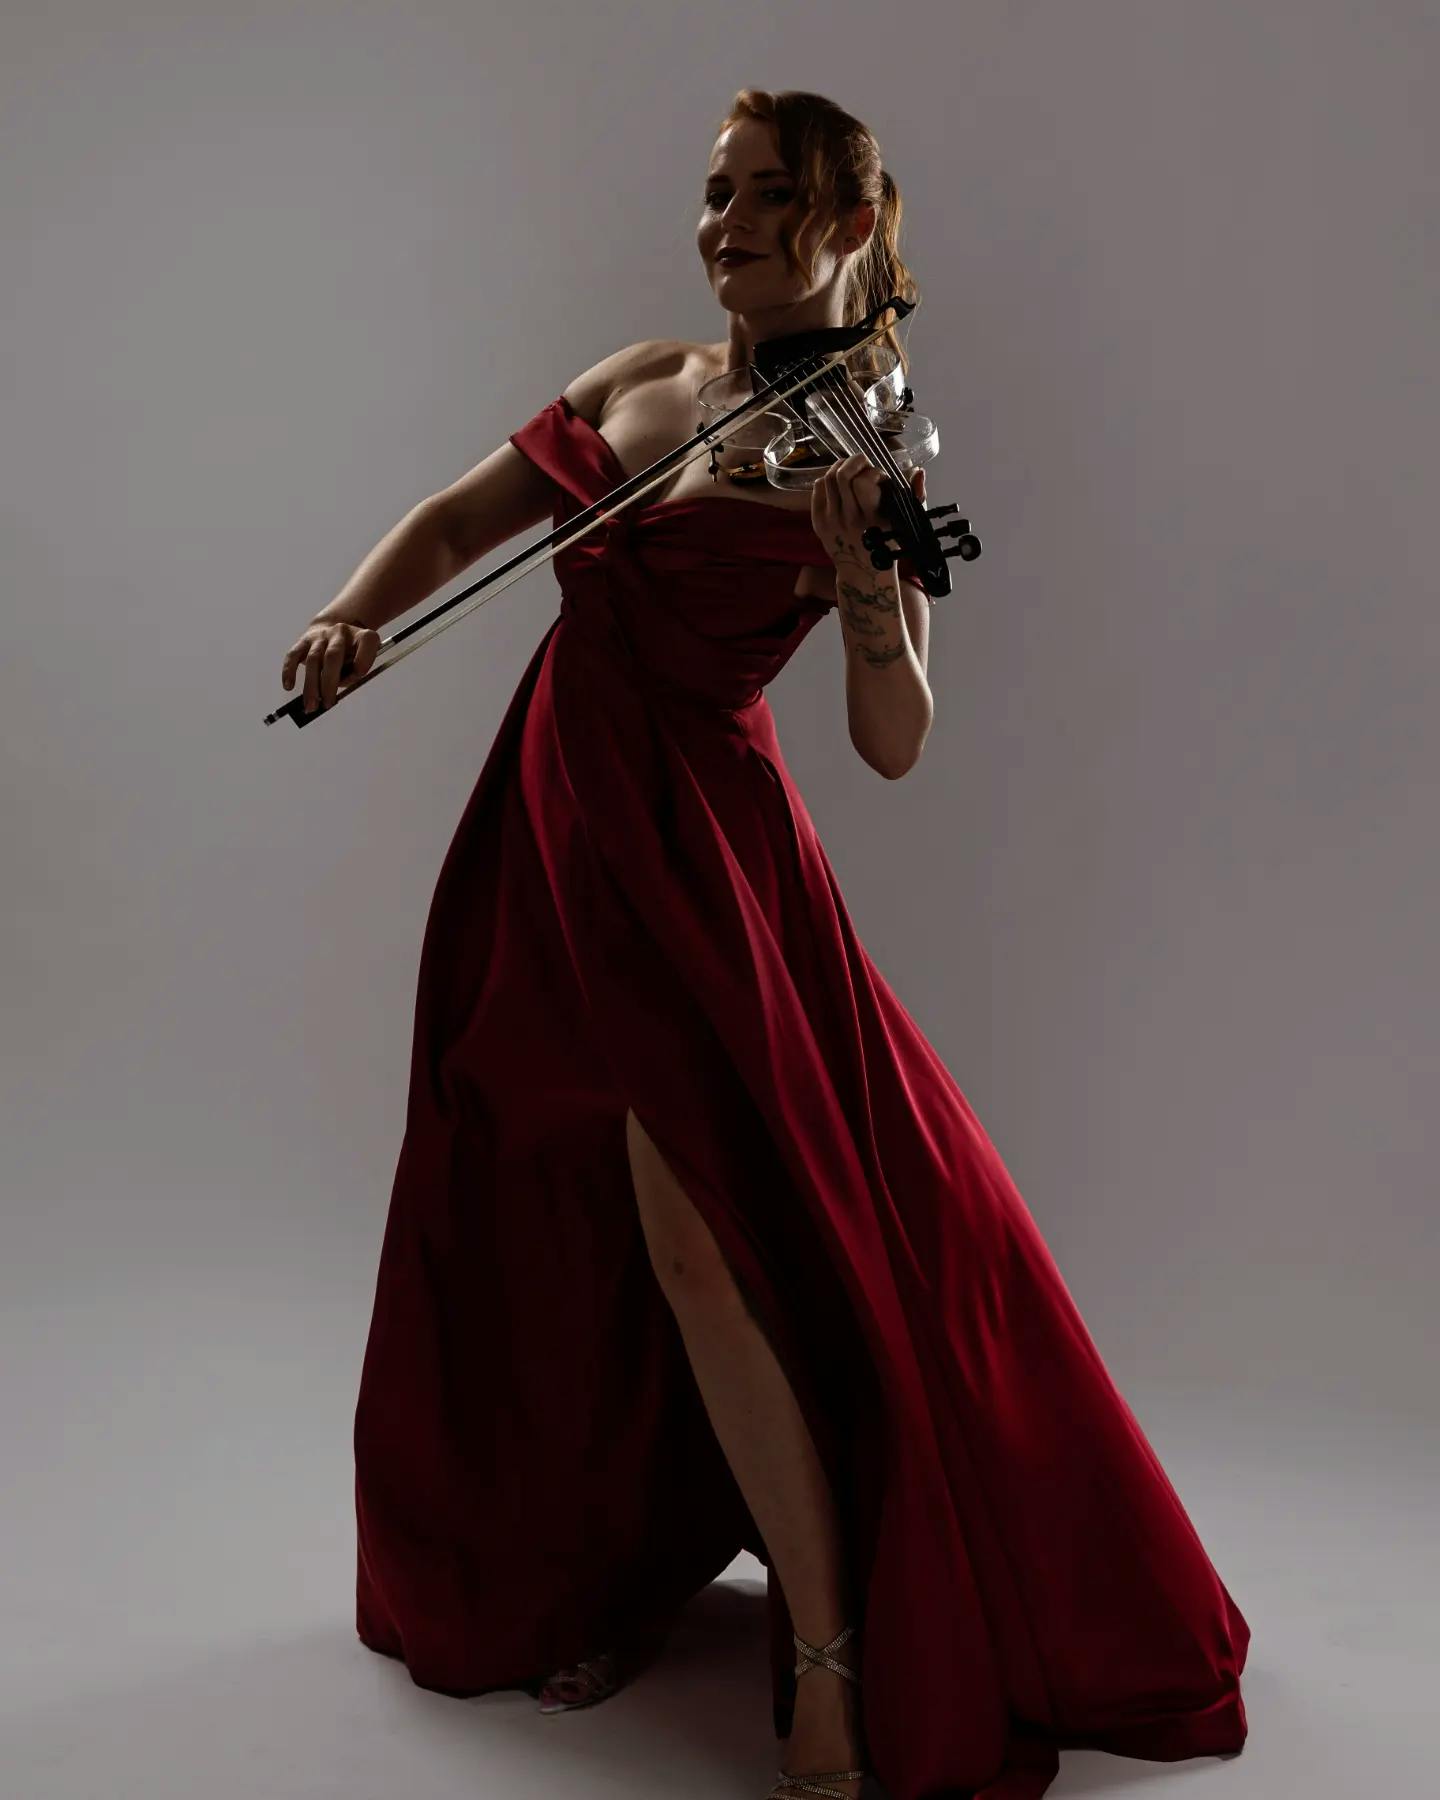 Ekaterina playing violin in a beautiful red dress